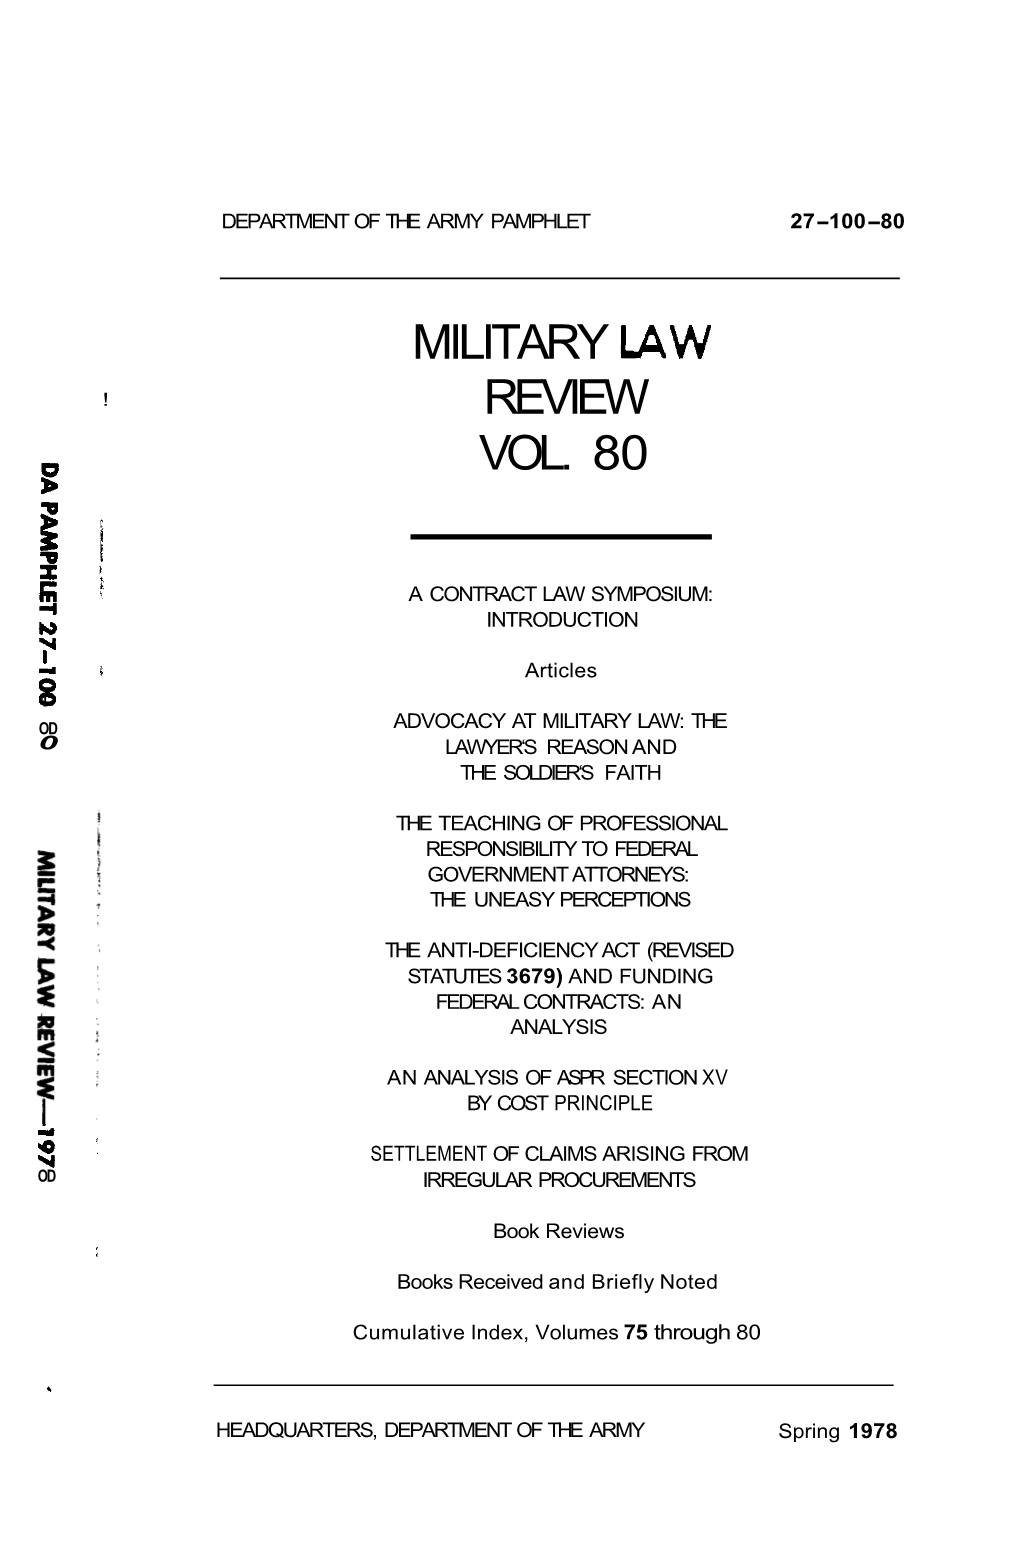 Military Law Review Vol. 80